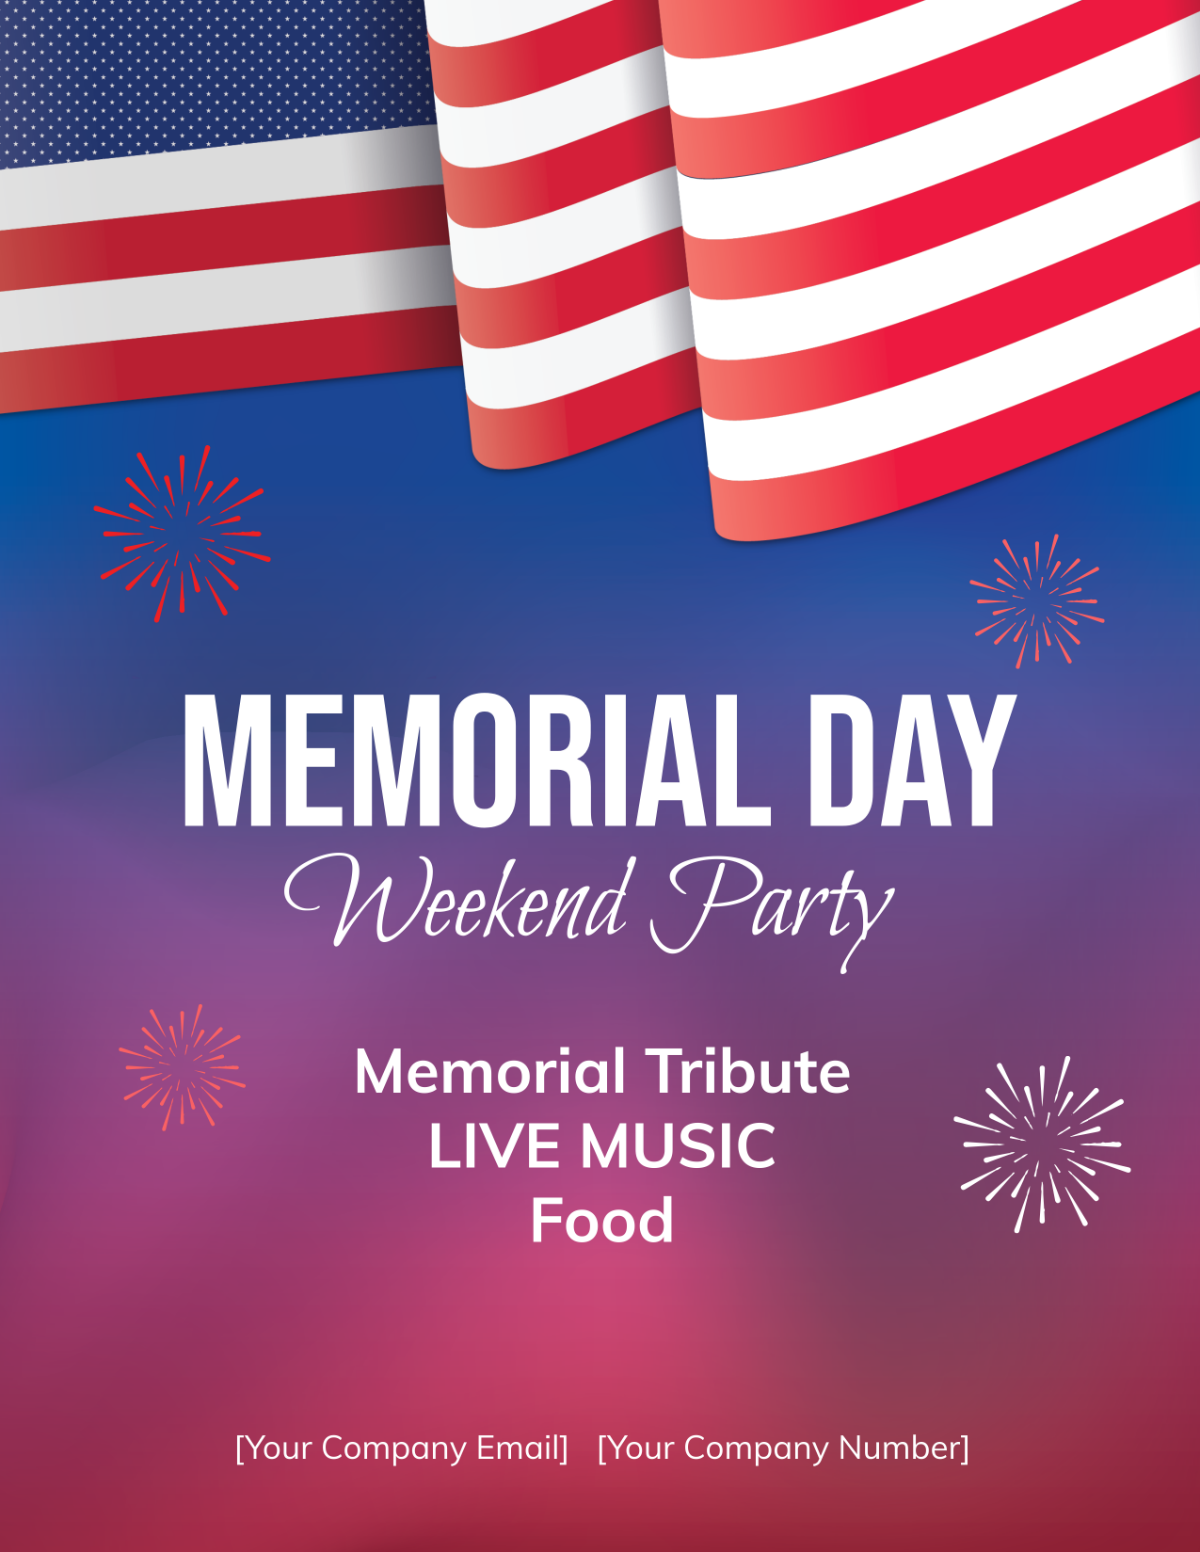 Memorial Day Weekend Party Flyer